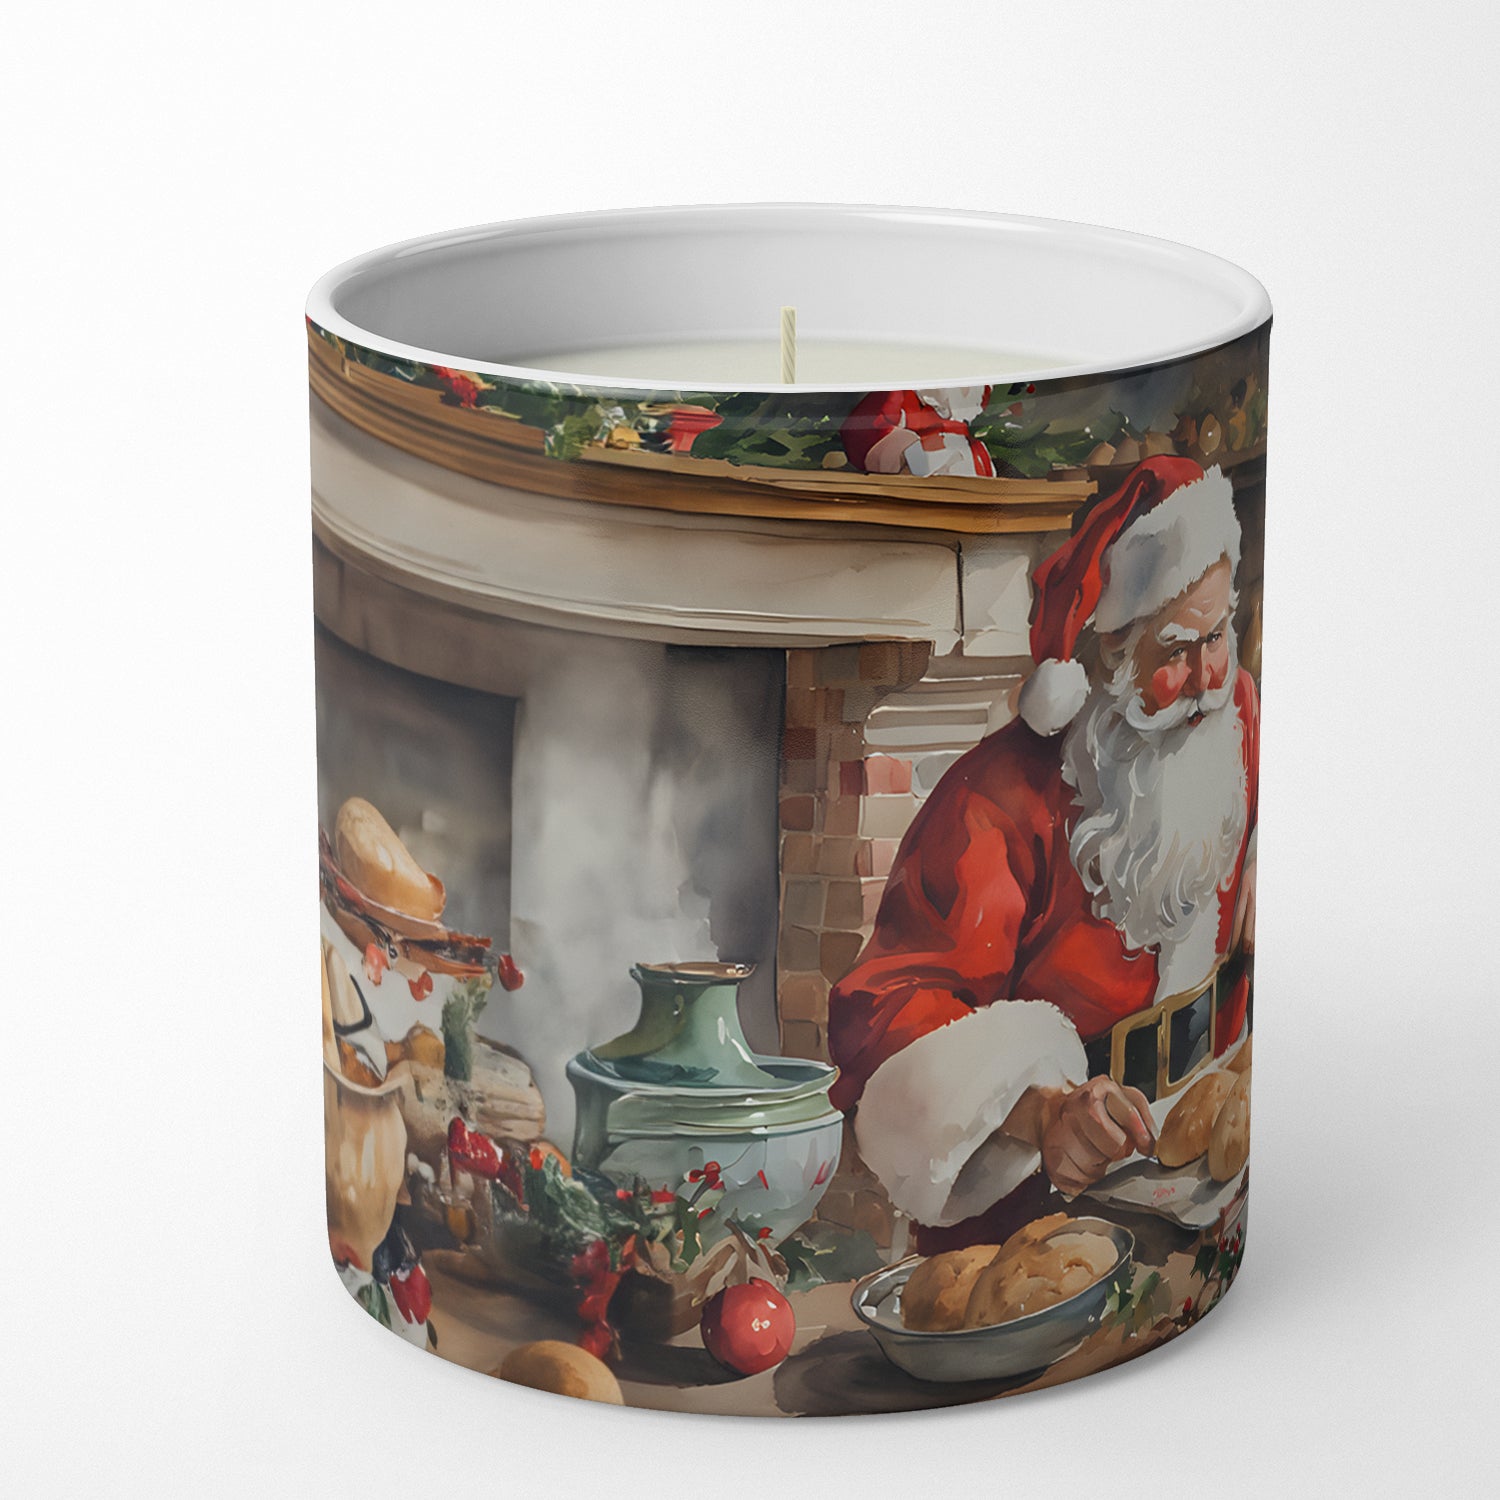 Cookies with Santa Claus Decorative Soy Candle